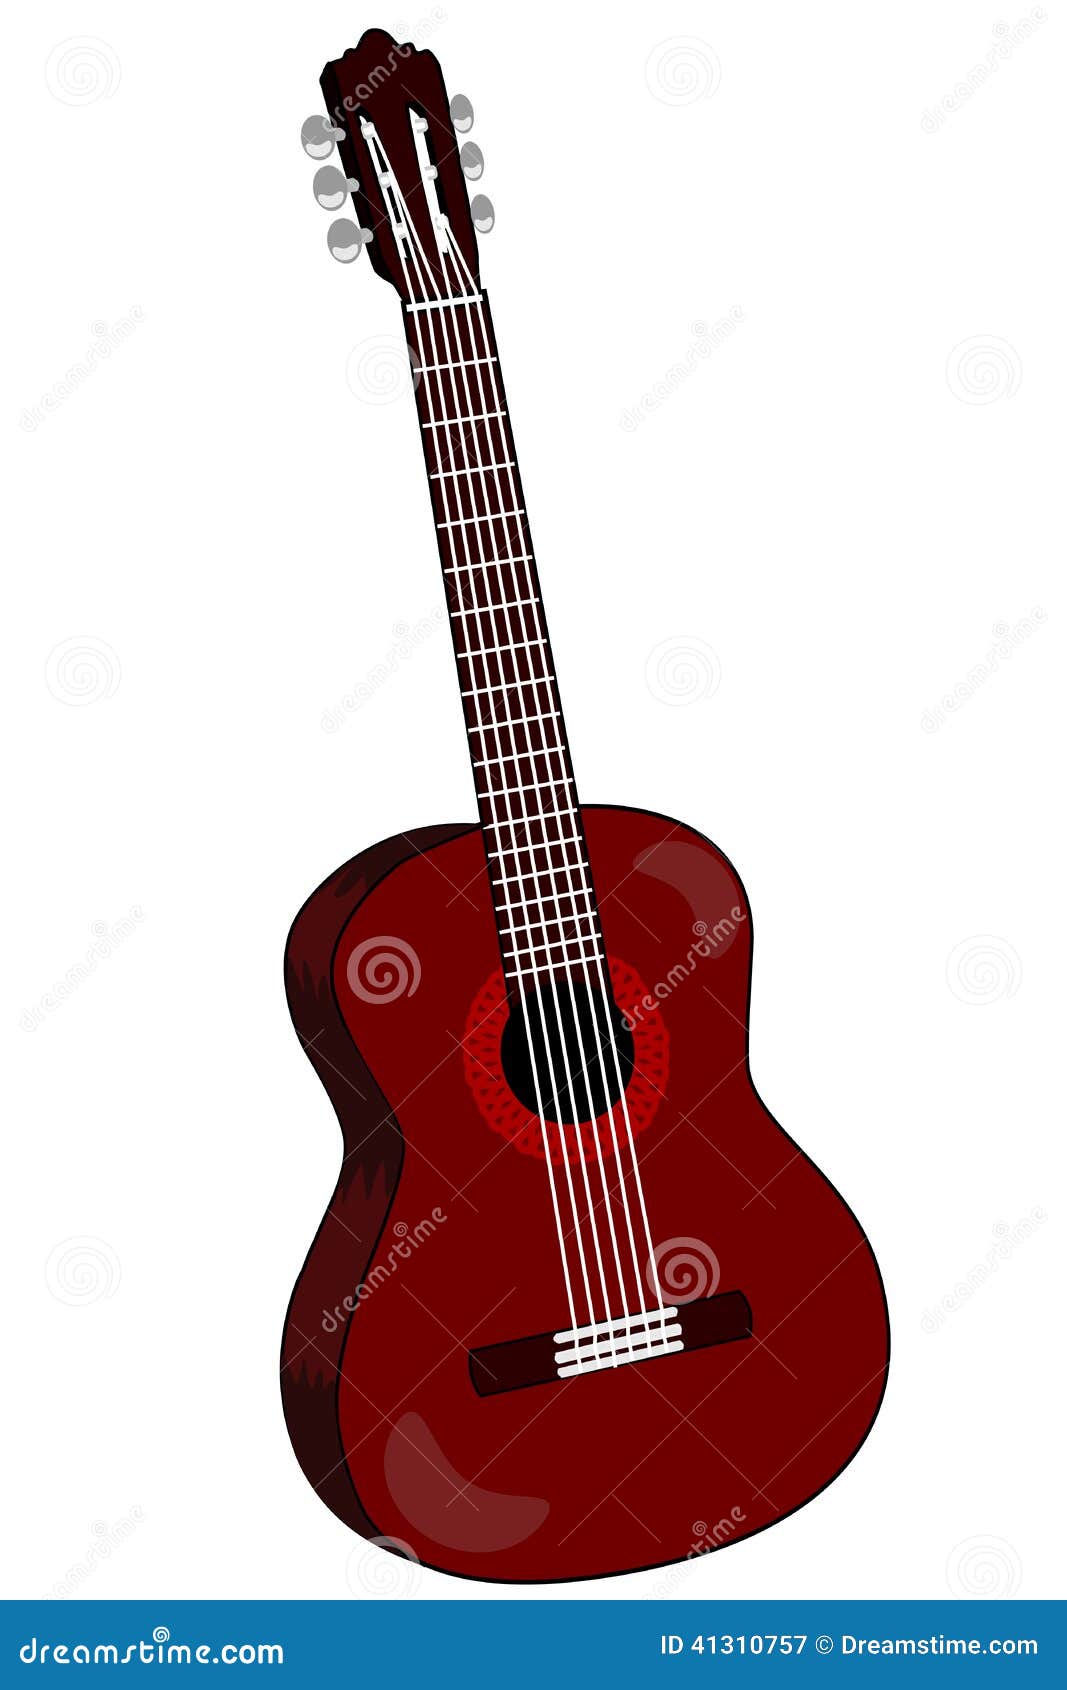 Vector image of acoustic guitar.